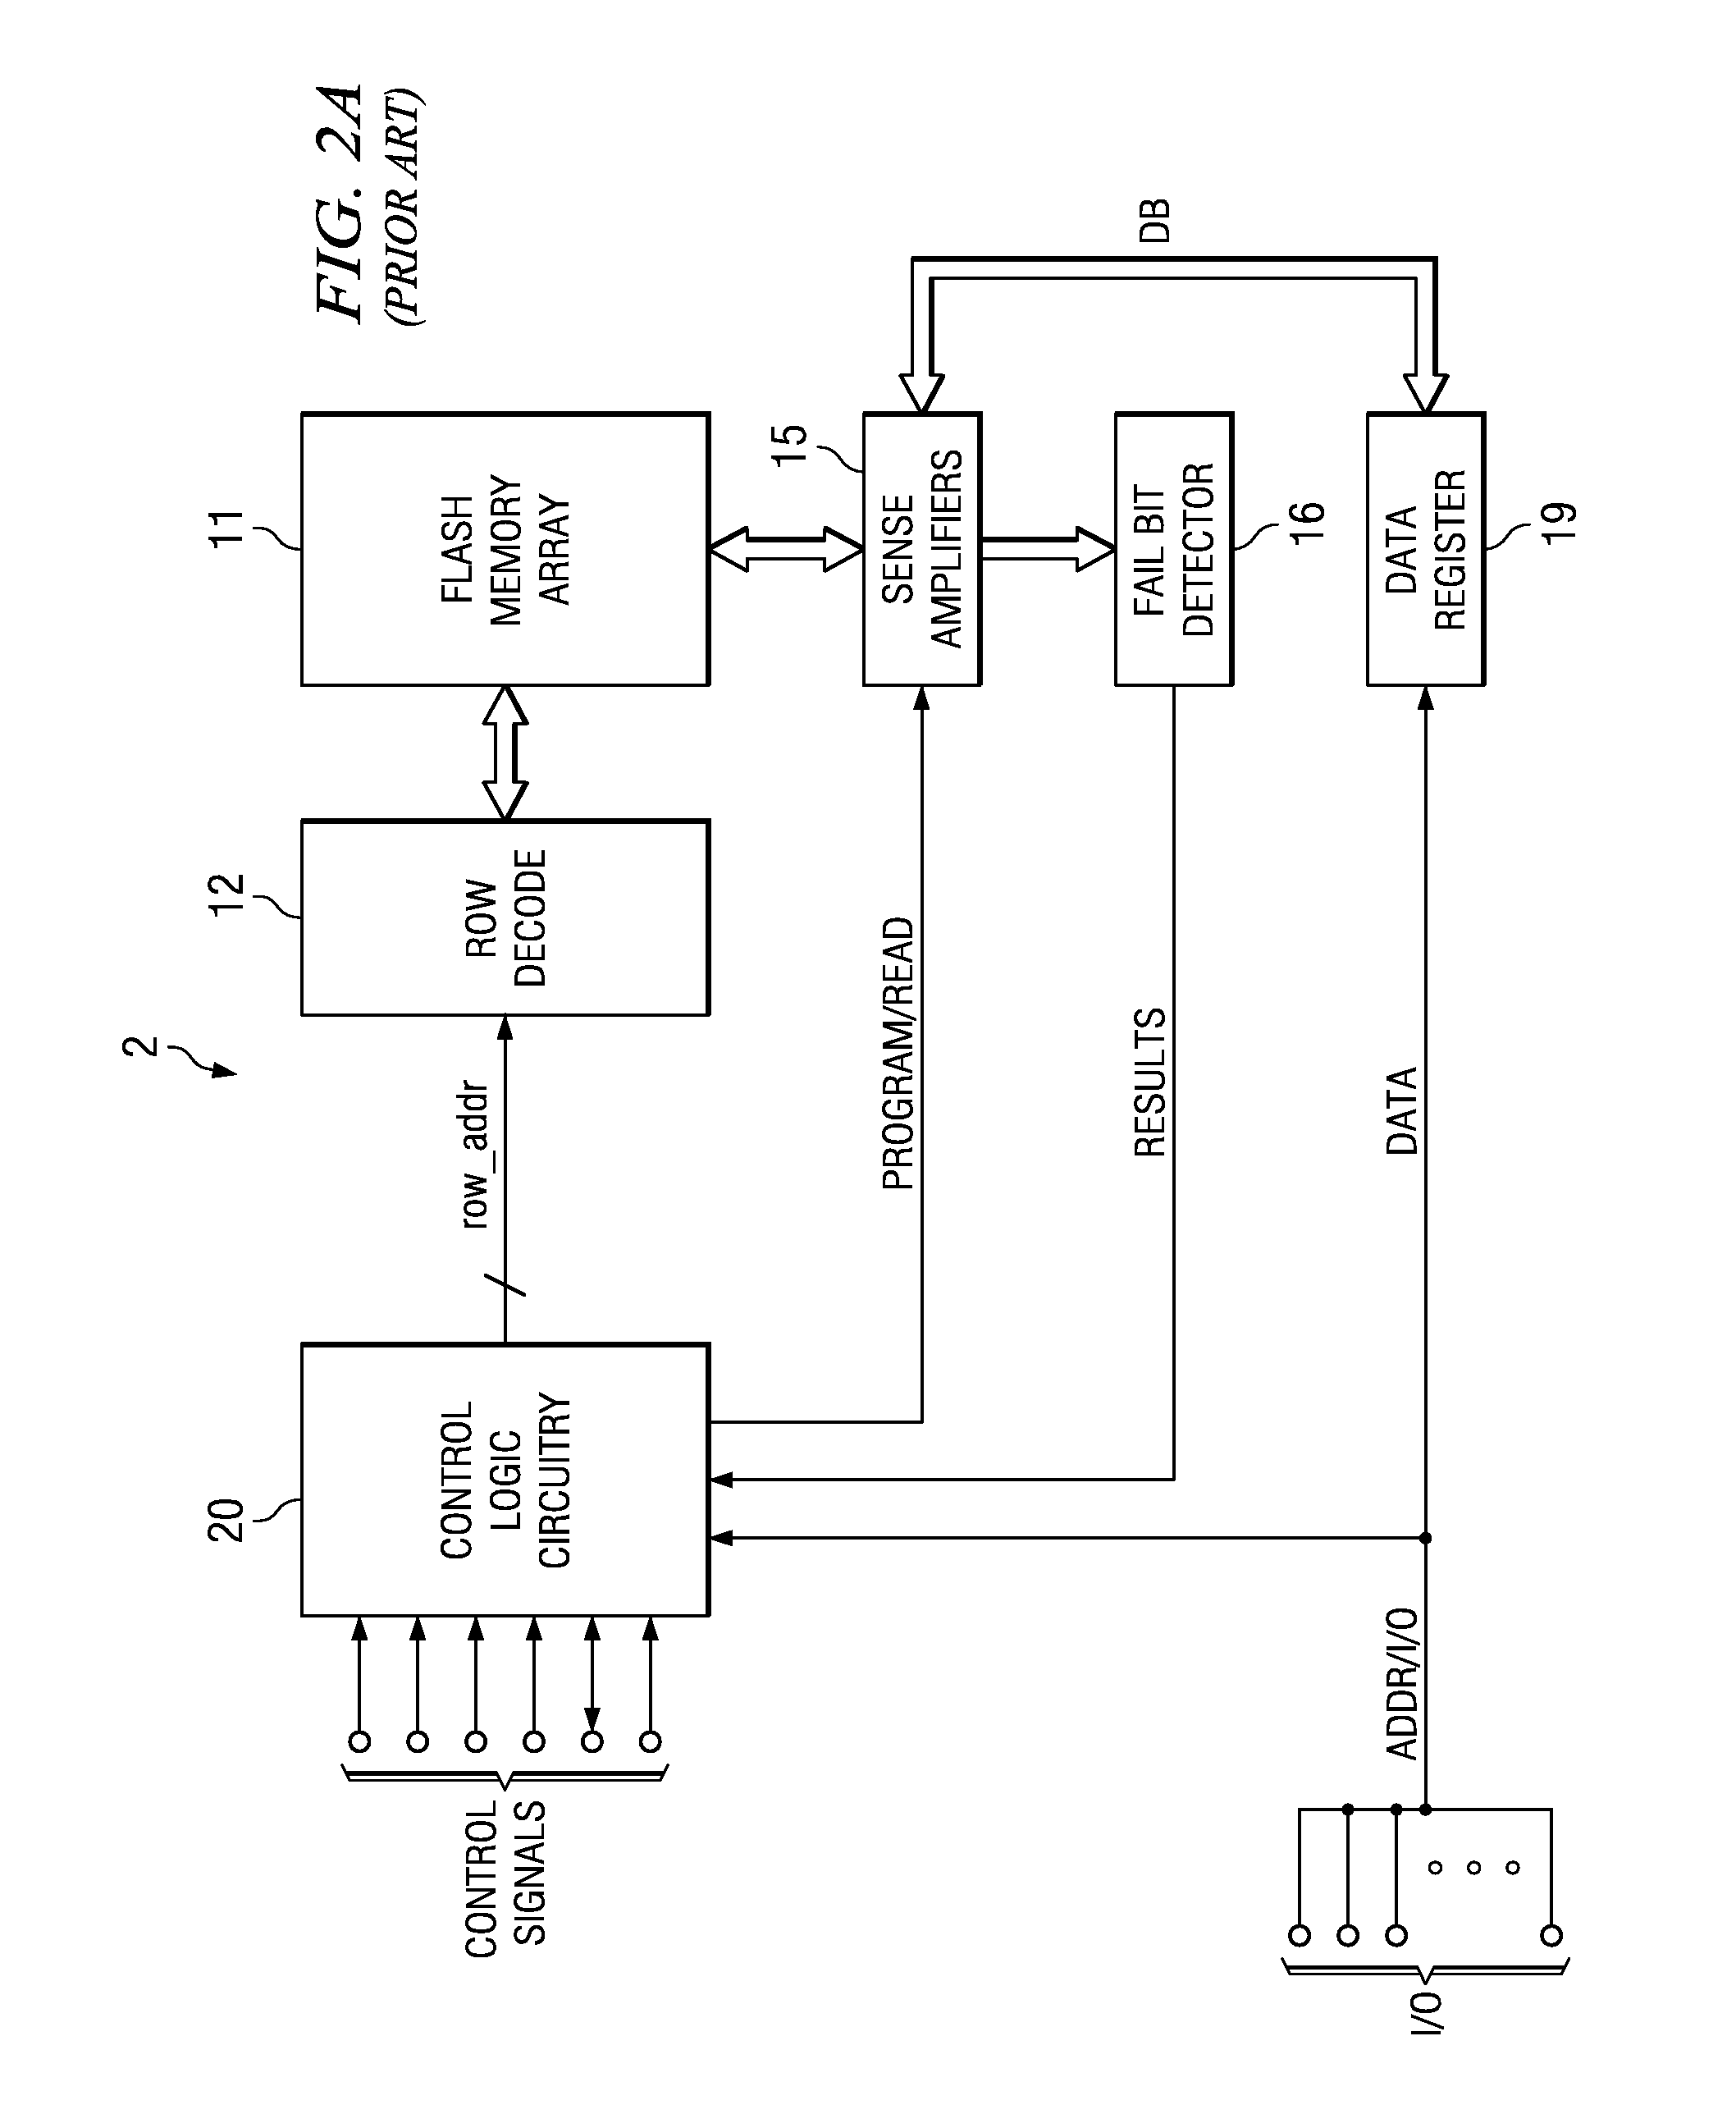 Method of partial page fail bit detection in flash memory devices